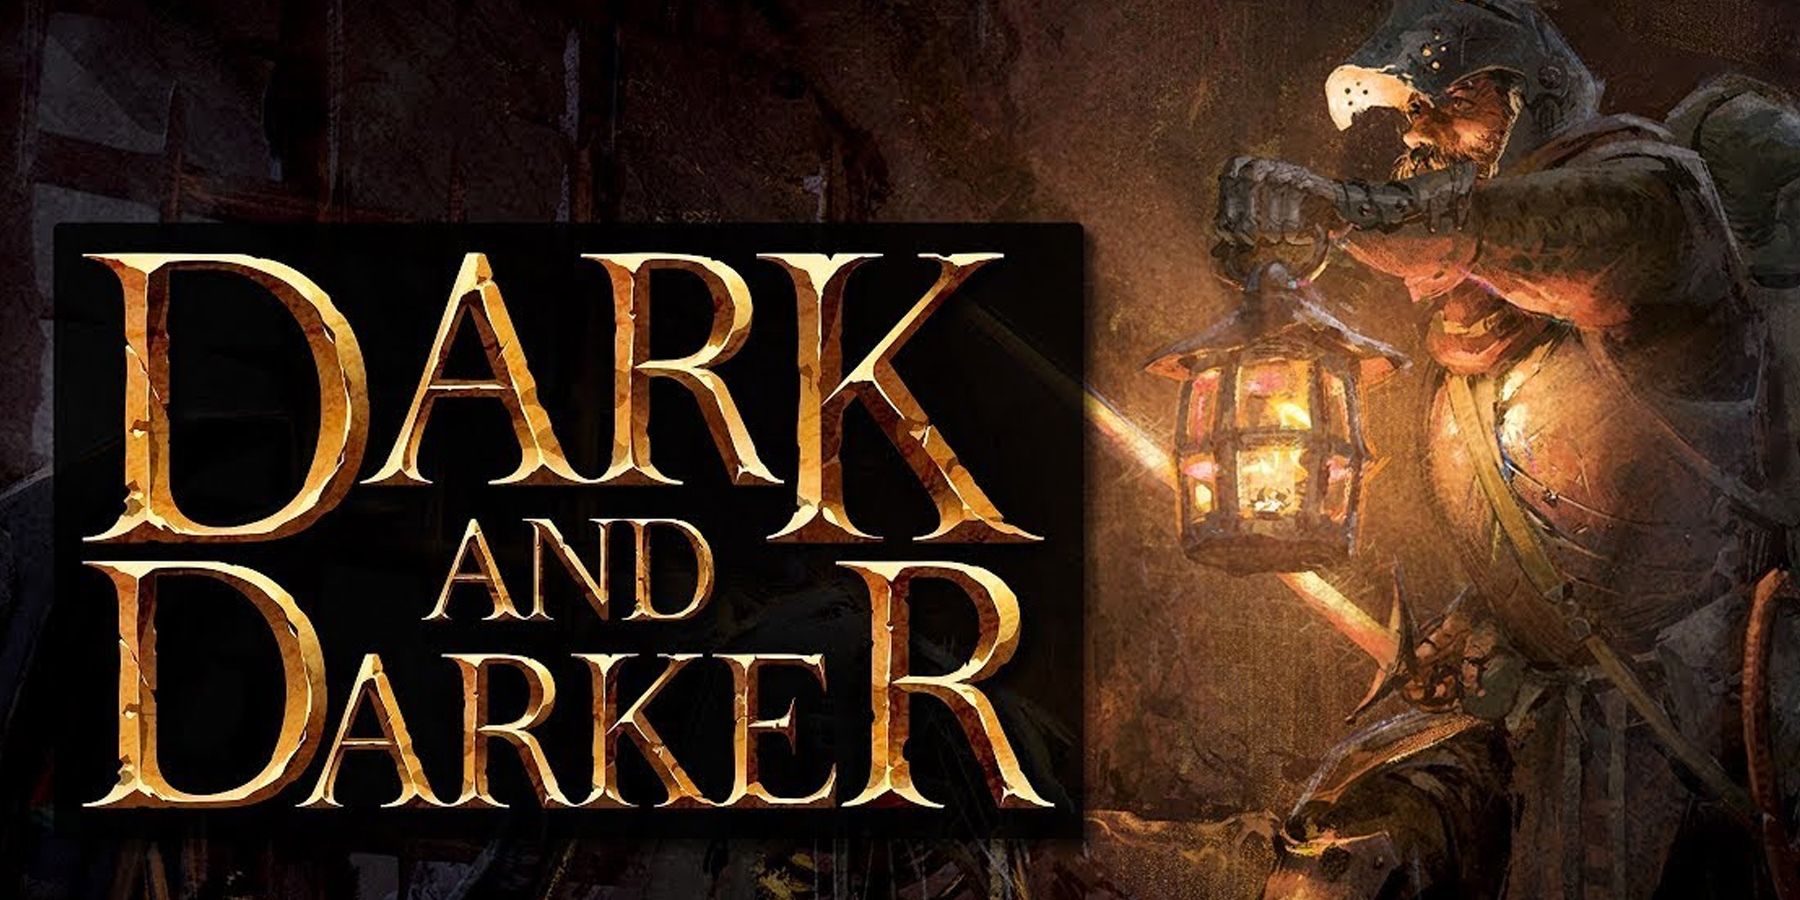 How to Play Dark & Darker: Where to Buy & Download